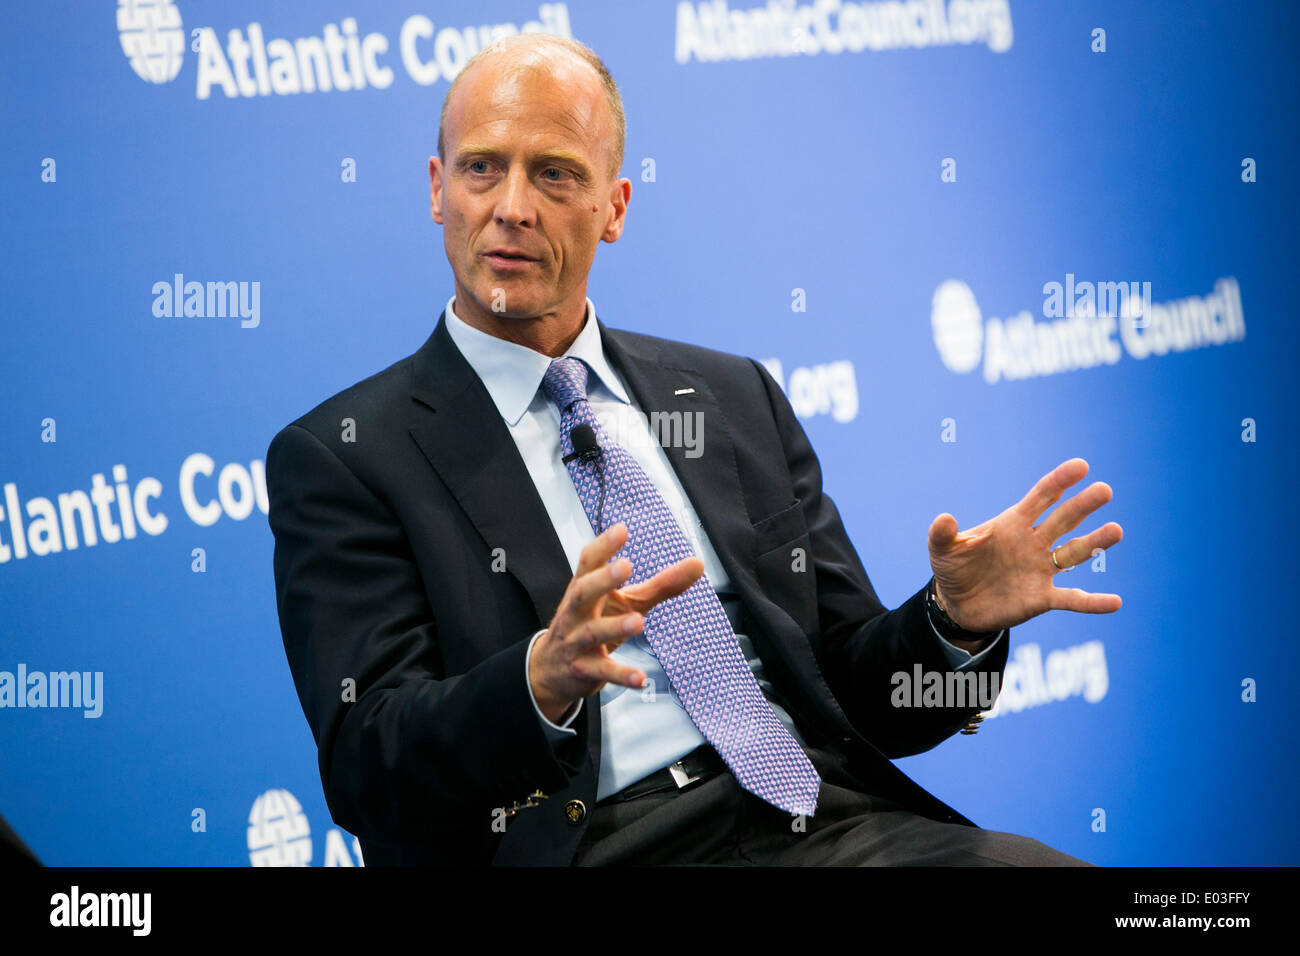 Washington DC, USA . 30th Apr, 2014. Tom Enders, Chief Executive Officer of the Airbus Group participates in an event  at The Atlantic Council in downtown Washington, D.C. on April 30, 2014. Credit:  Kristoffer Tripplaar/Alamy Live News Stock Photo